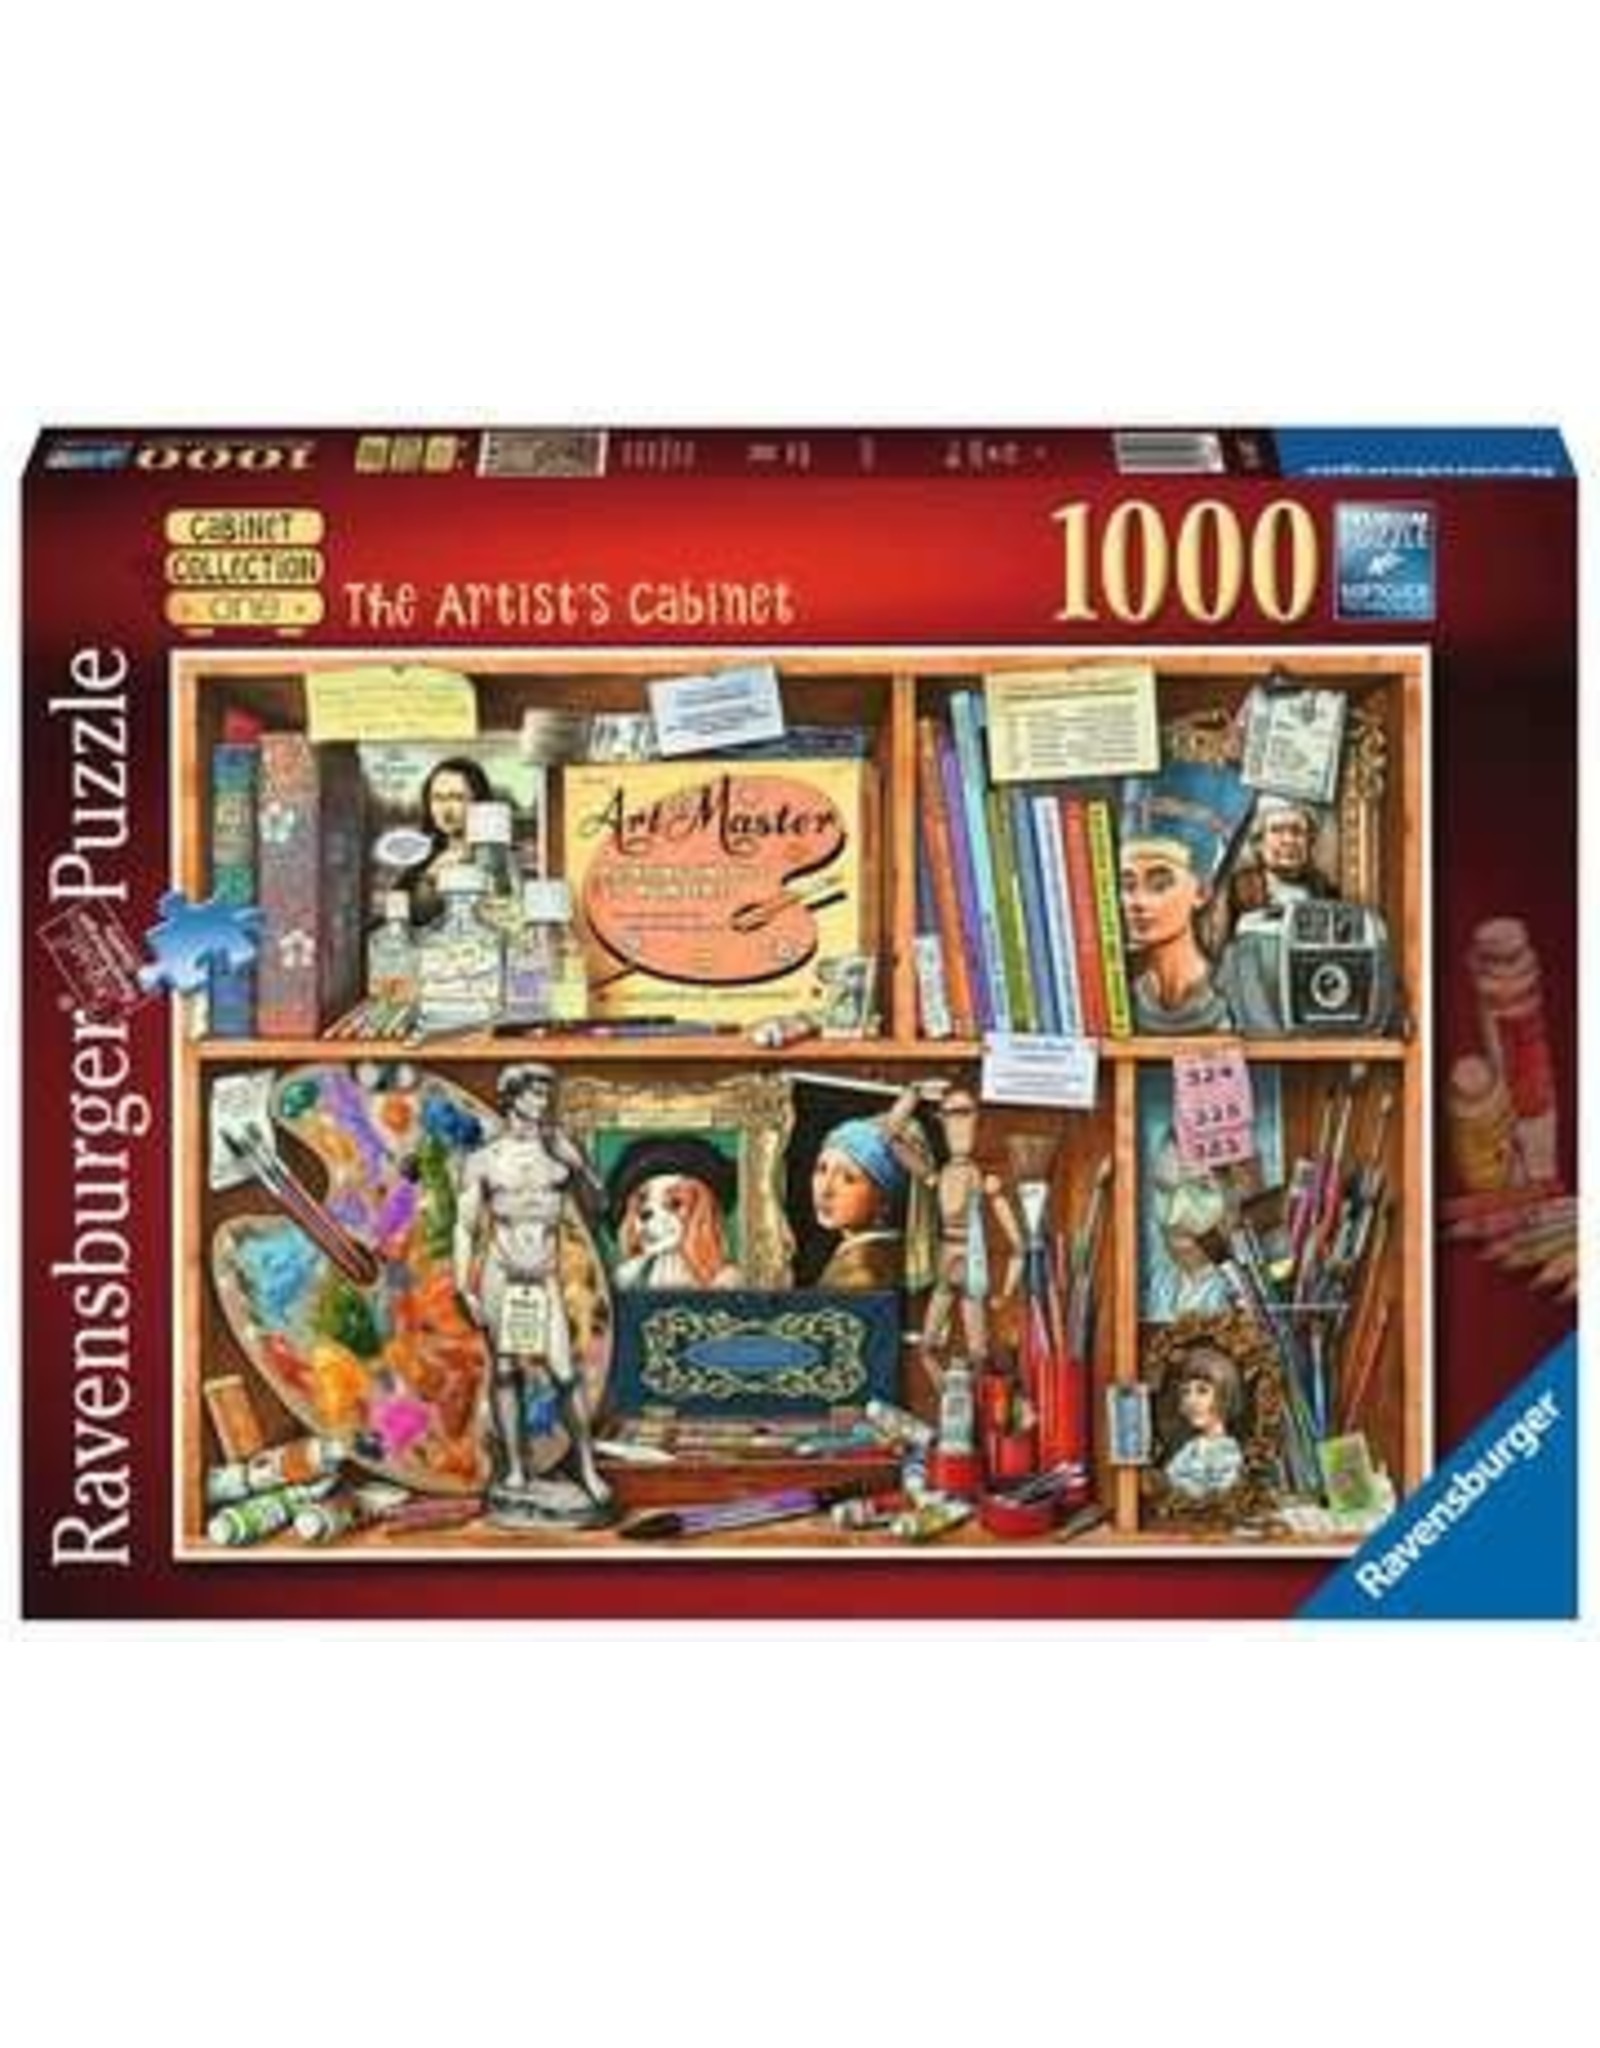 The Artist's Cabinet 1000 pc